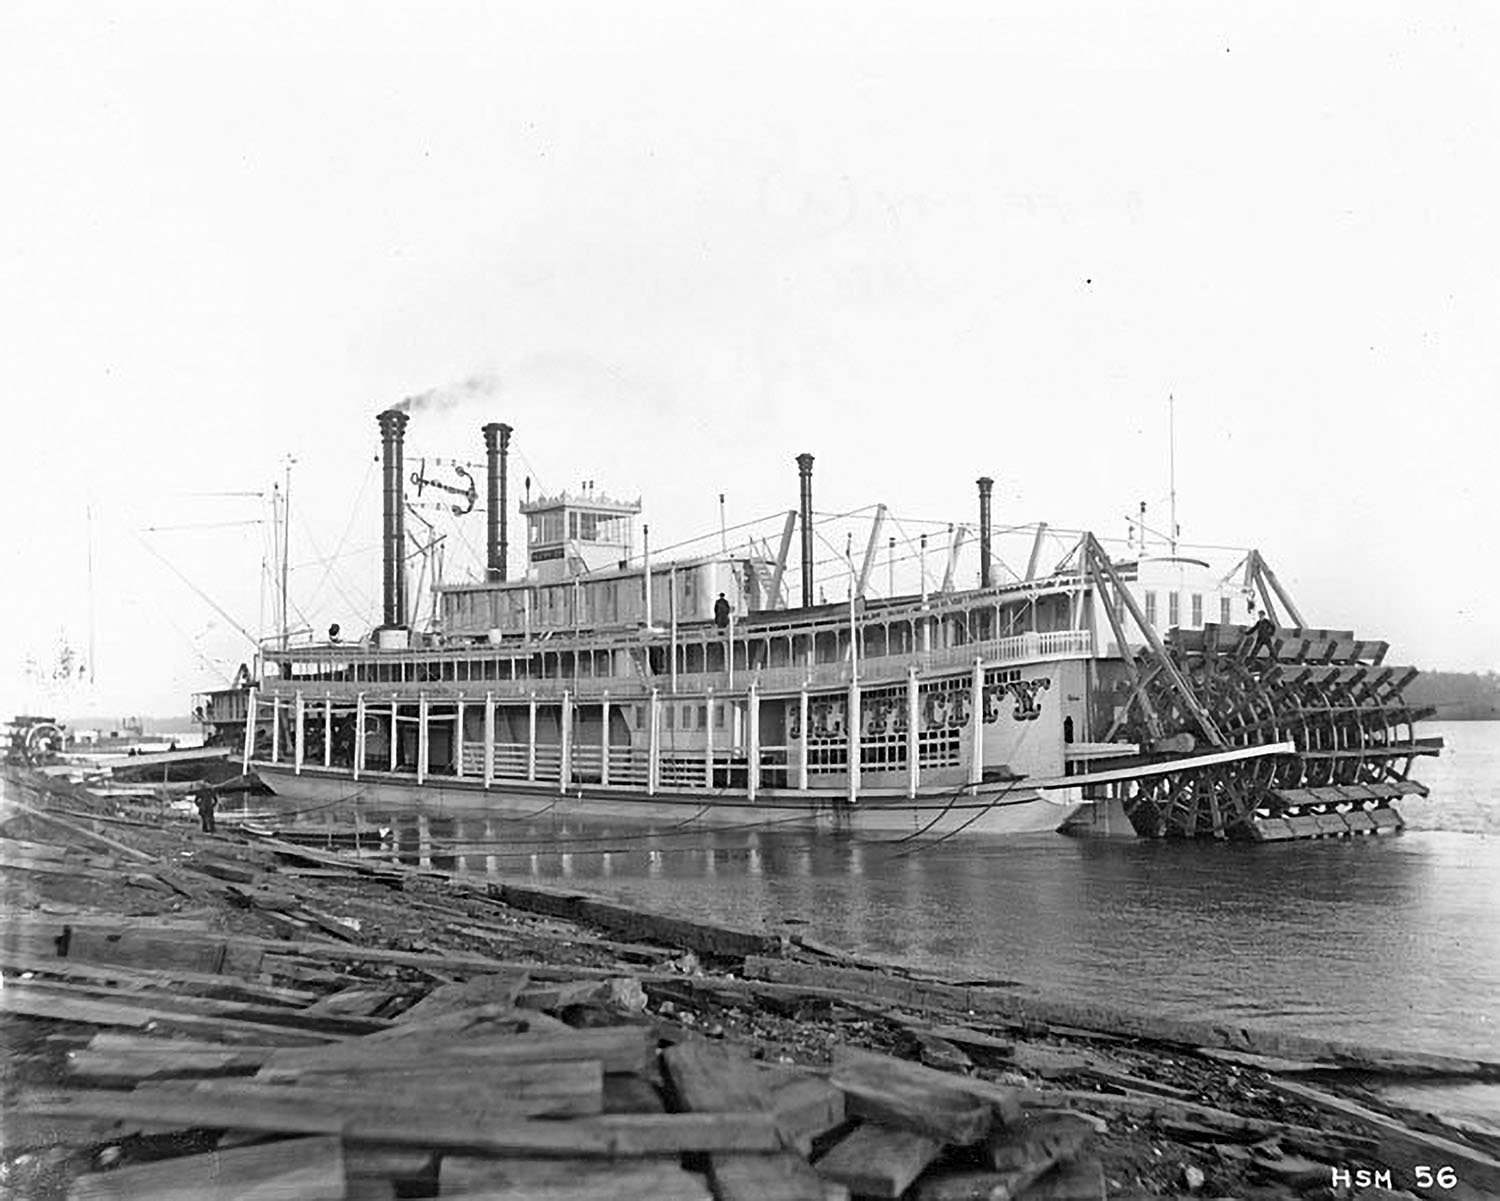 The Bluff City as a new boat at the Howard Shipyard in 1896. (Keith Norrington collection)